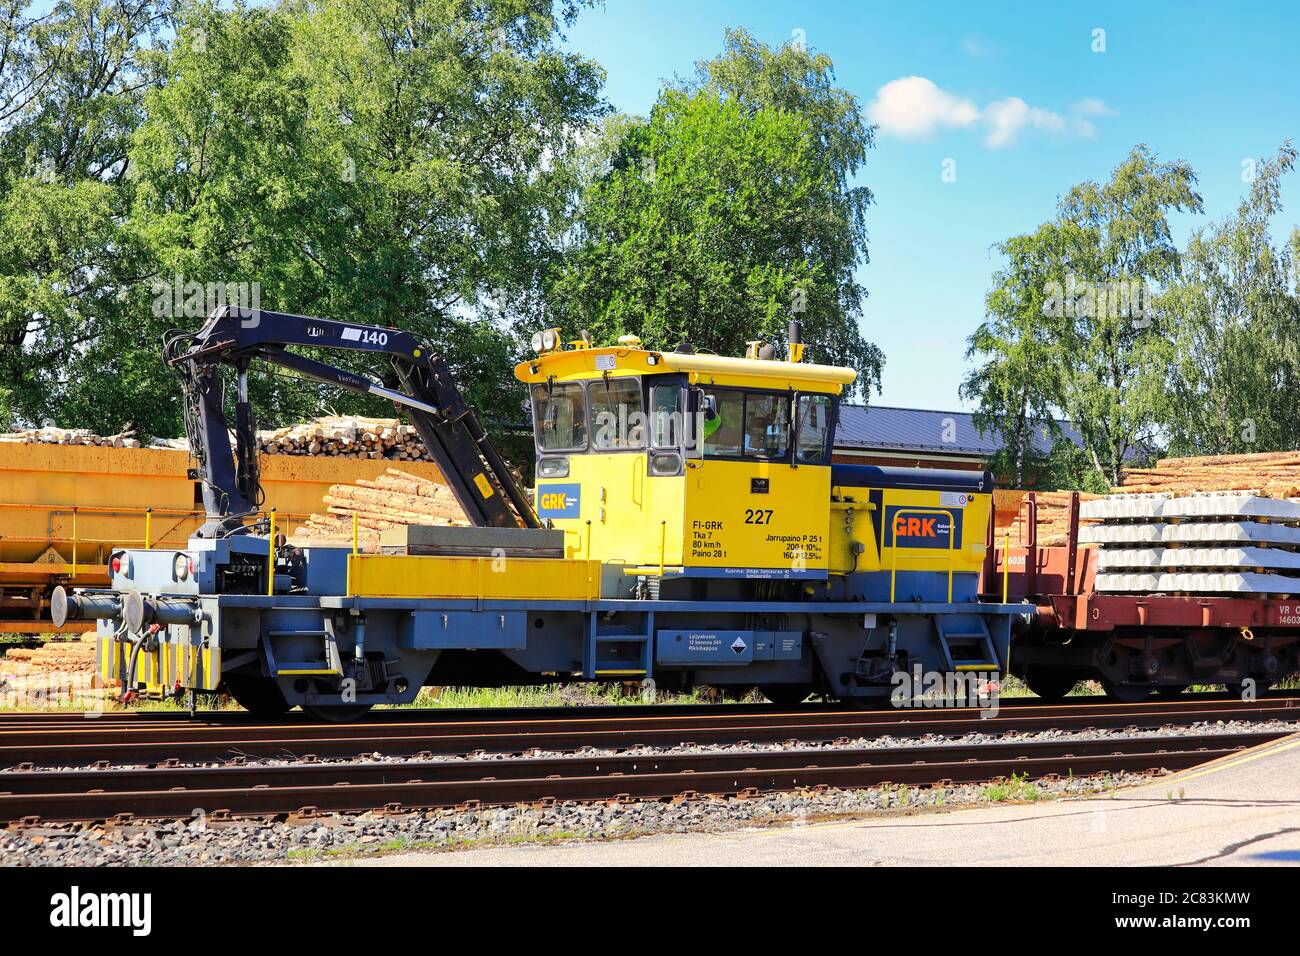 Yellow Tka7 on-track-machine no 227. 80 Tka7 were manufactured by Valmet in 1977-93, numbered 168–247. Salo Railway Station, Finland. July 18, 2020. Stock Photo